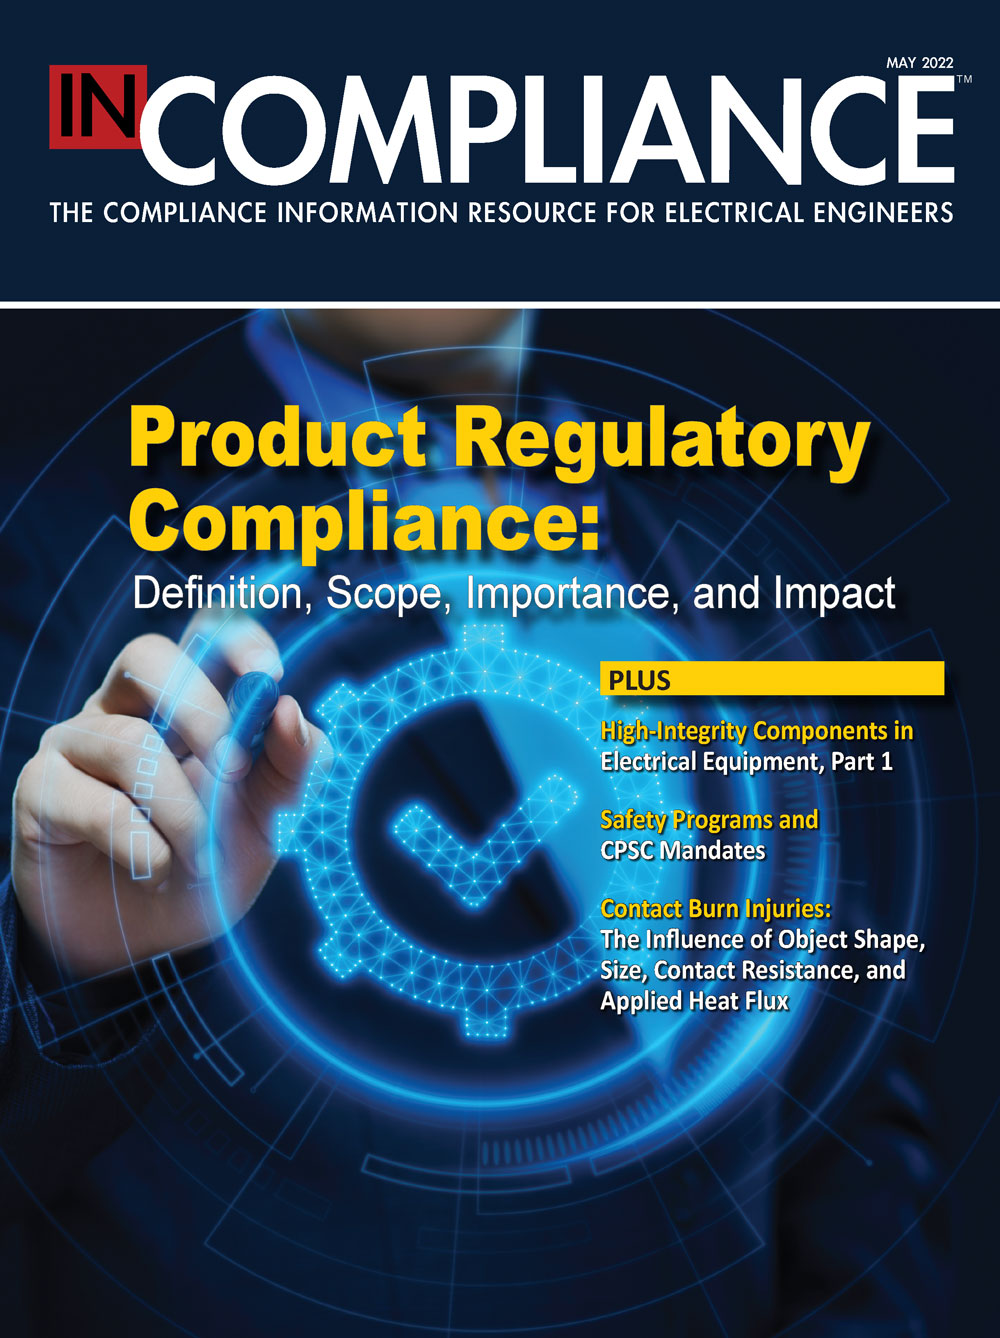 In Compliance May 2022 cover